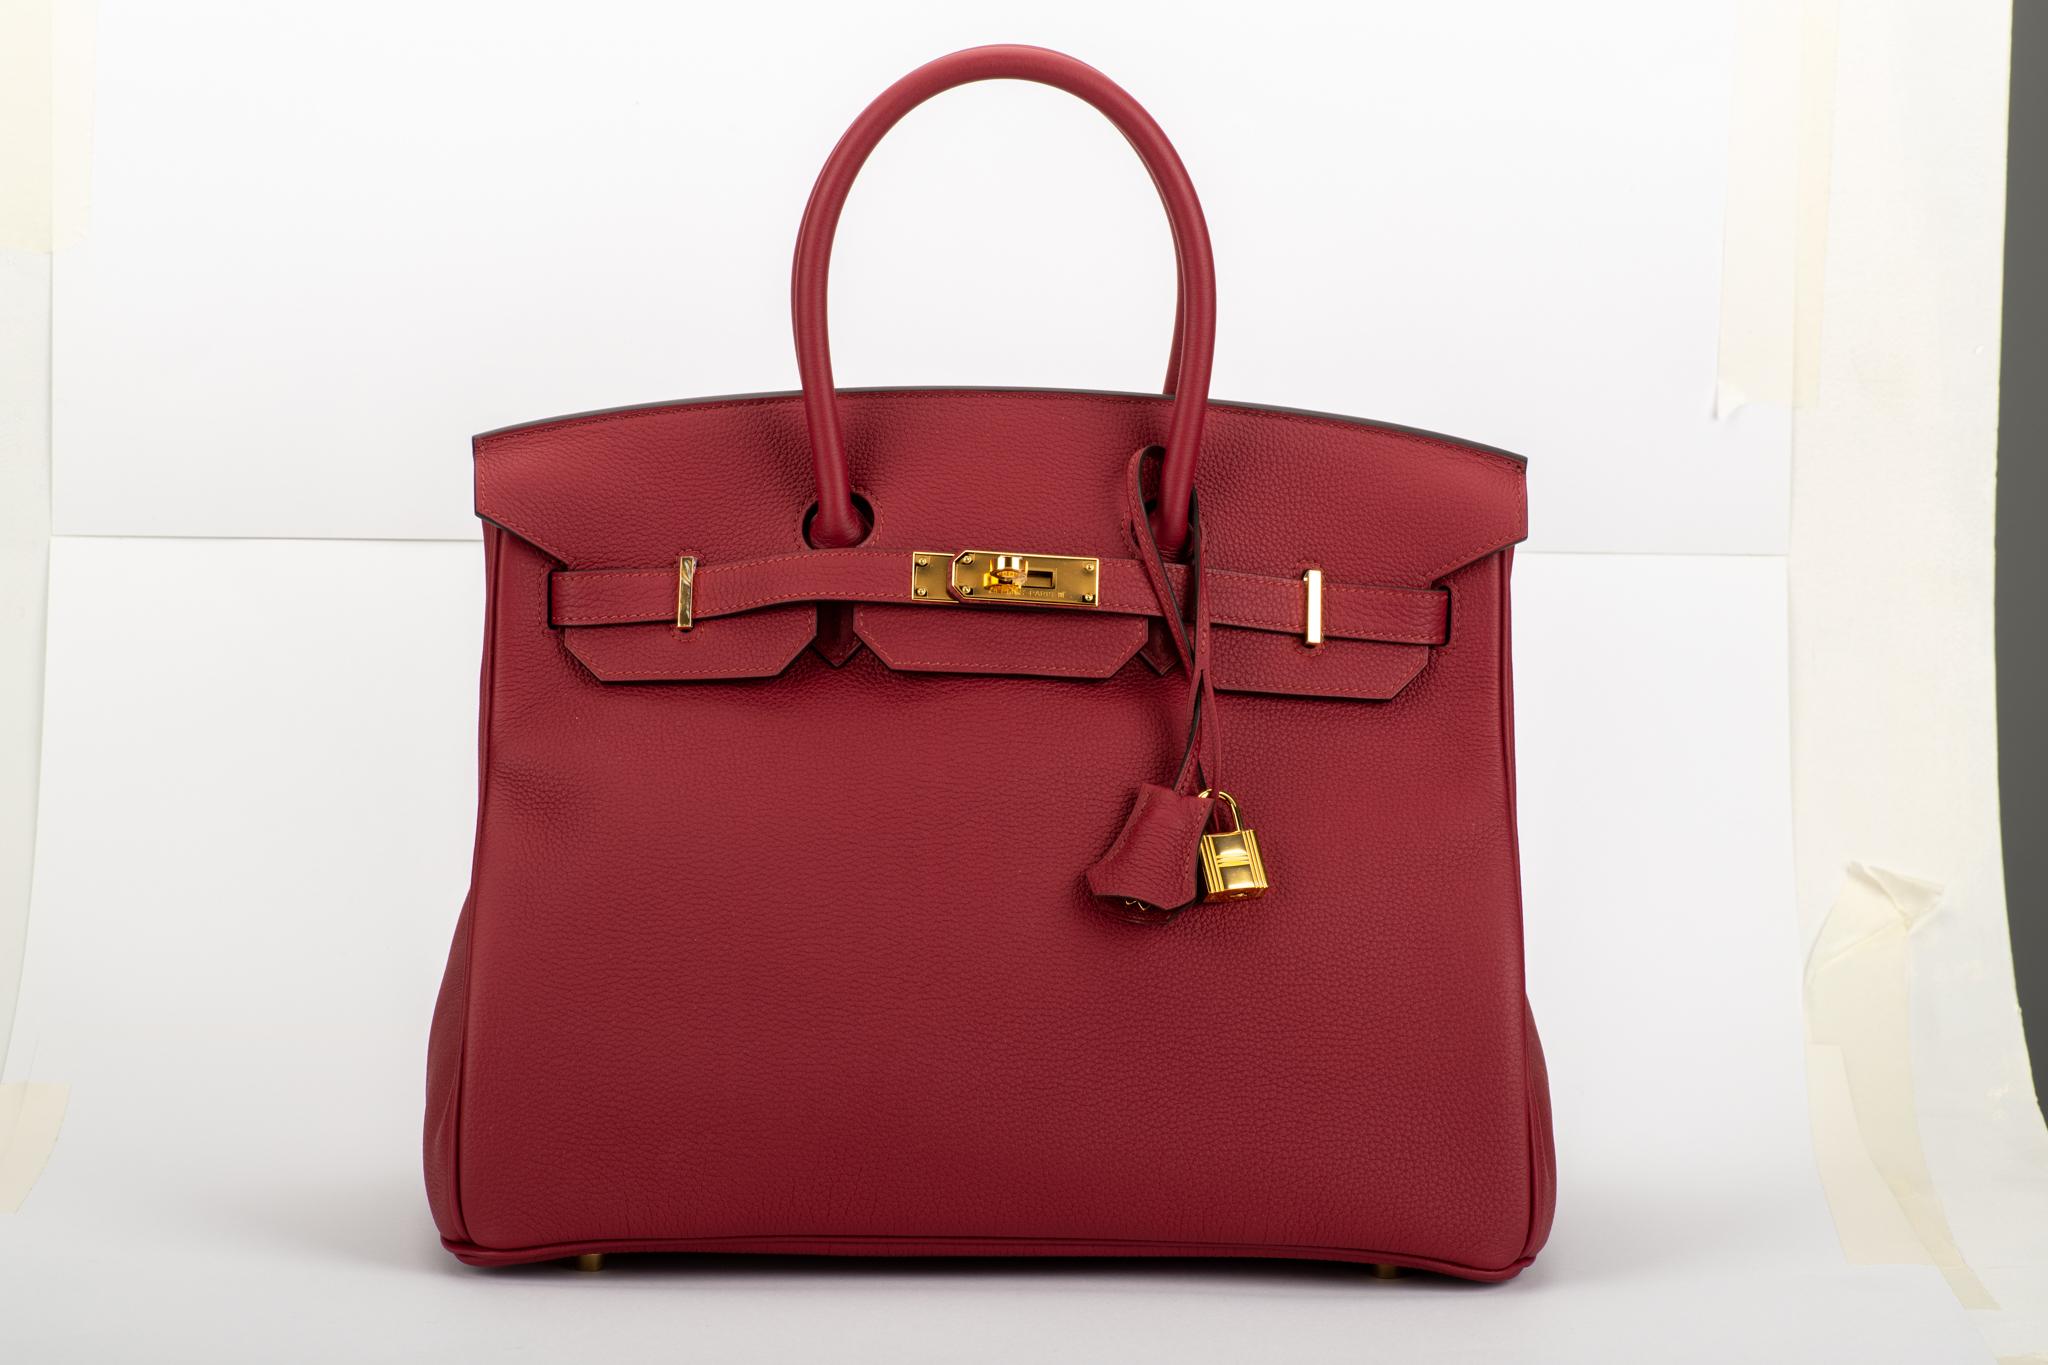 Hermes BNIB birkin 35 cm in rouge grenat togo leather with gold tone hardware. Date stamp C for 2018. Comes with clochette, tirette, two locks, keys, dust cover and original box. Never worn.